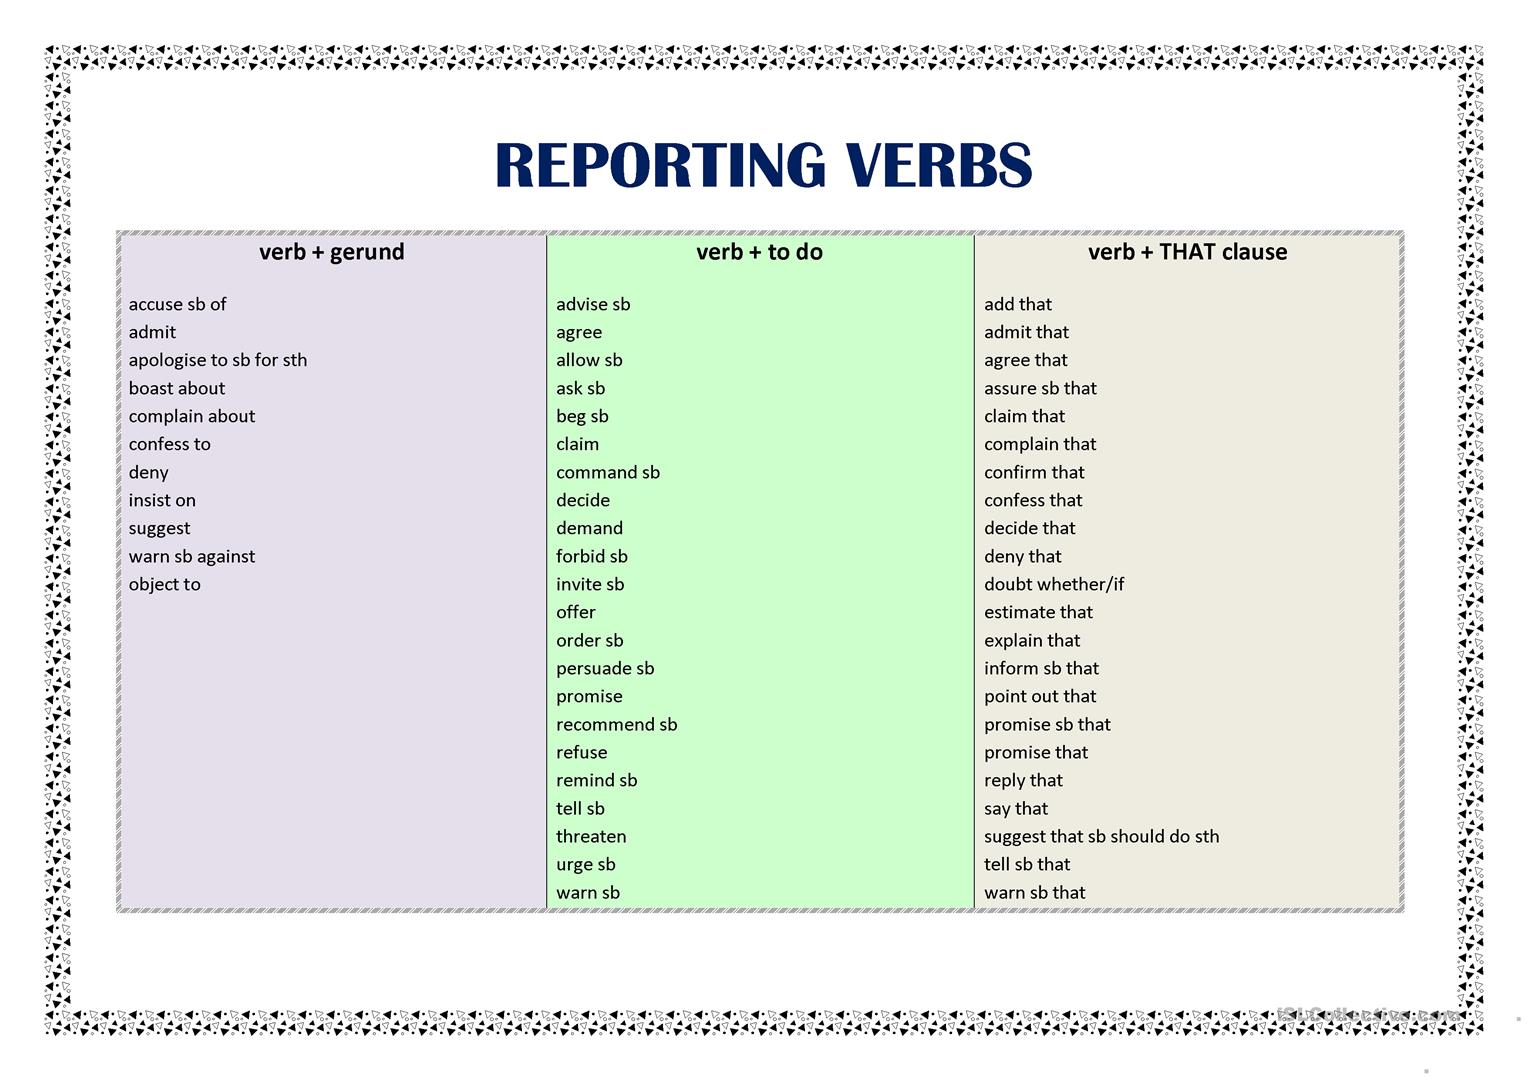 when-there-s-a-will-there-s-a-way-verb-patterns-with-reporting-verbs